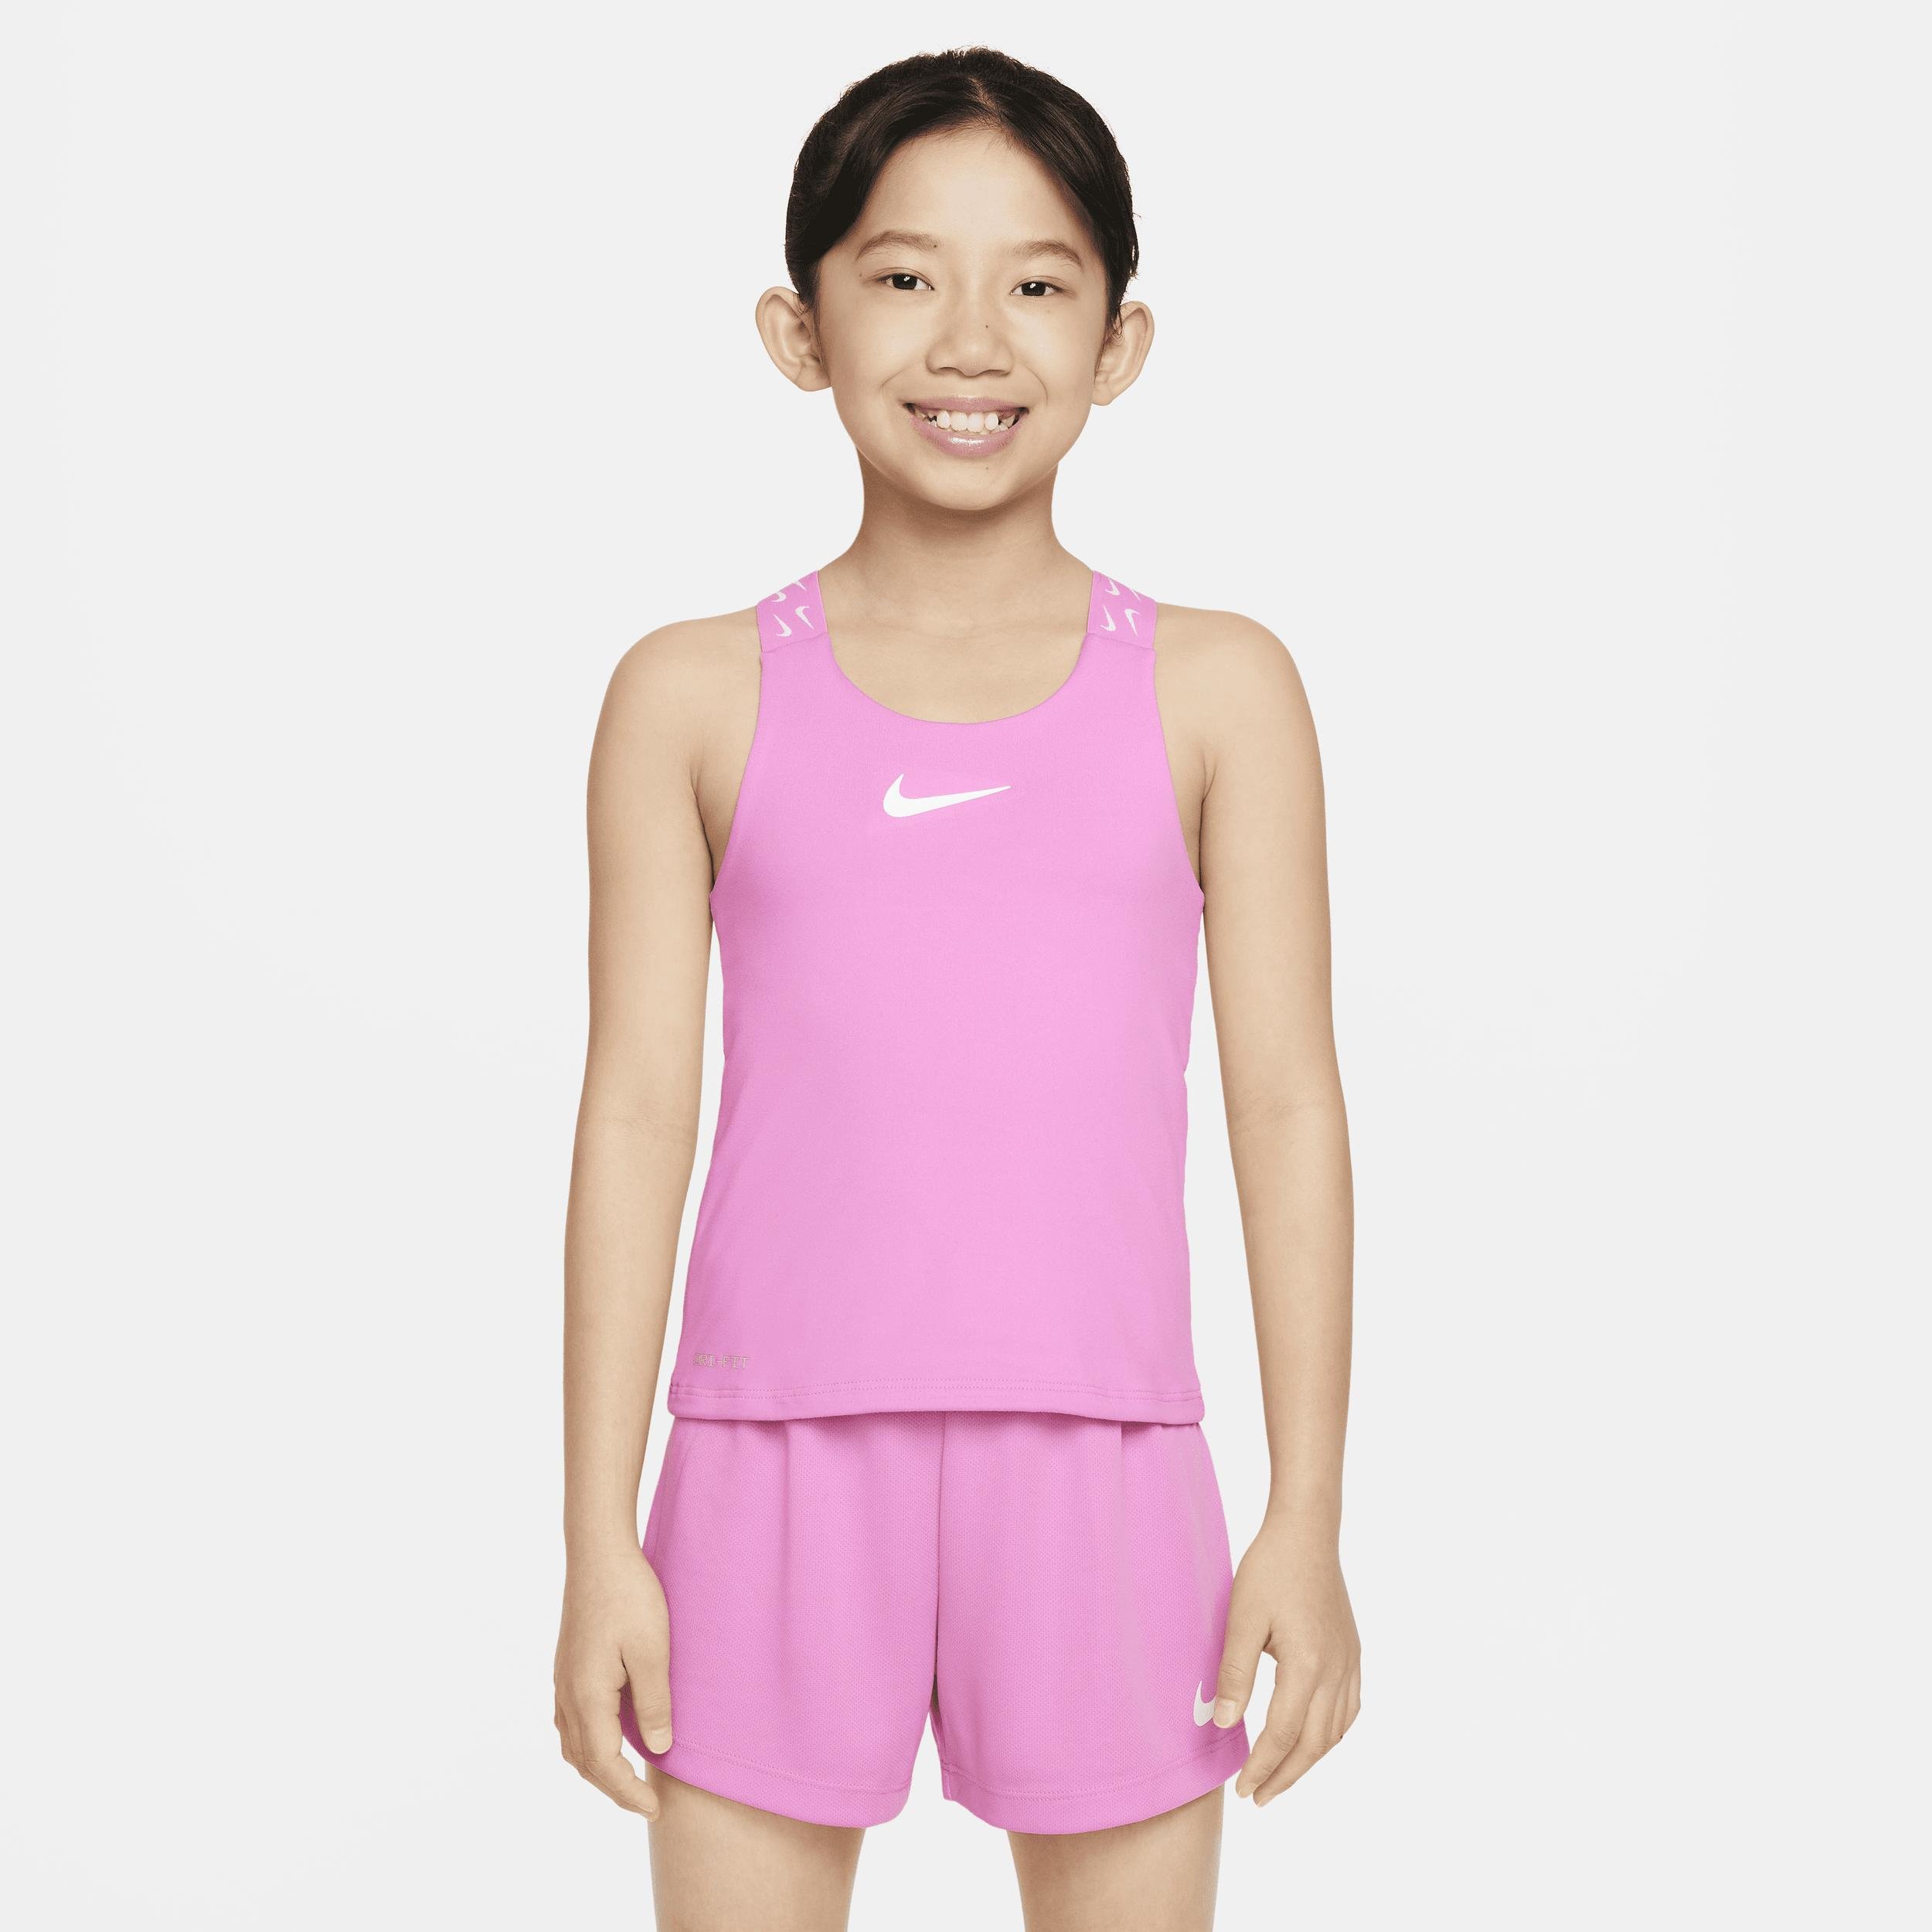 Nike Dri-FIT Little Kids' Fitted Tank Top by NIKE